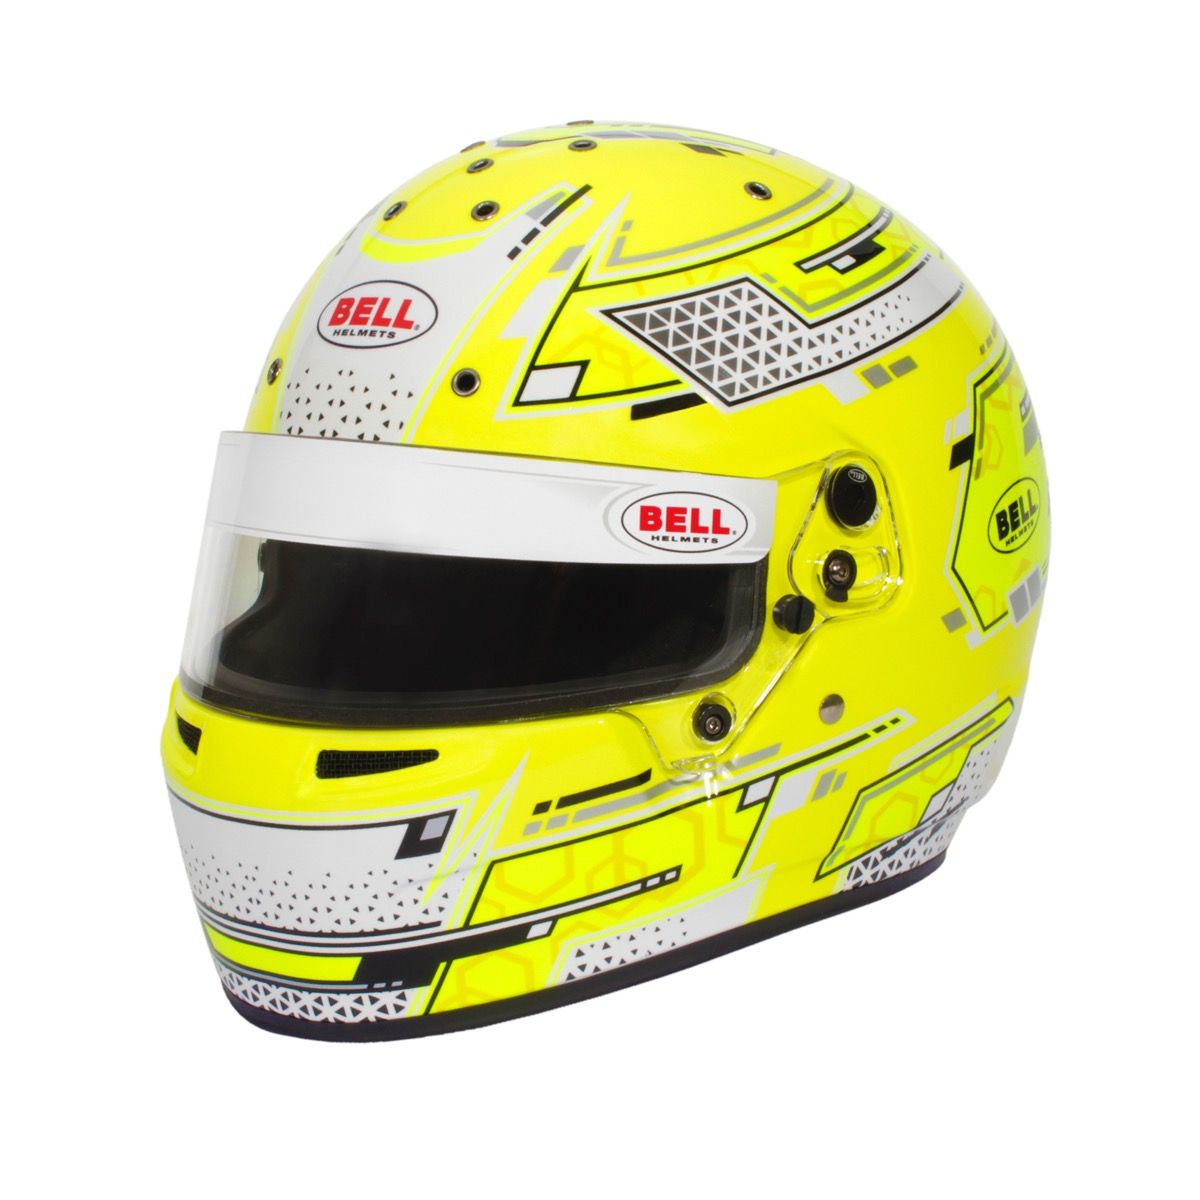 Bell Helmets - Bell RS7-K - Helmet Excellence in Racing Safety